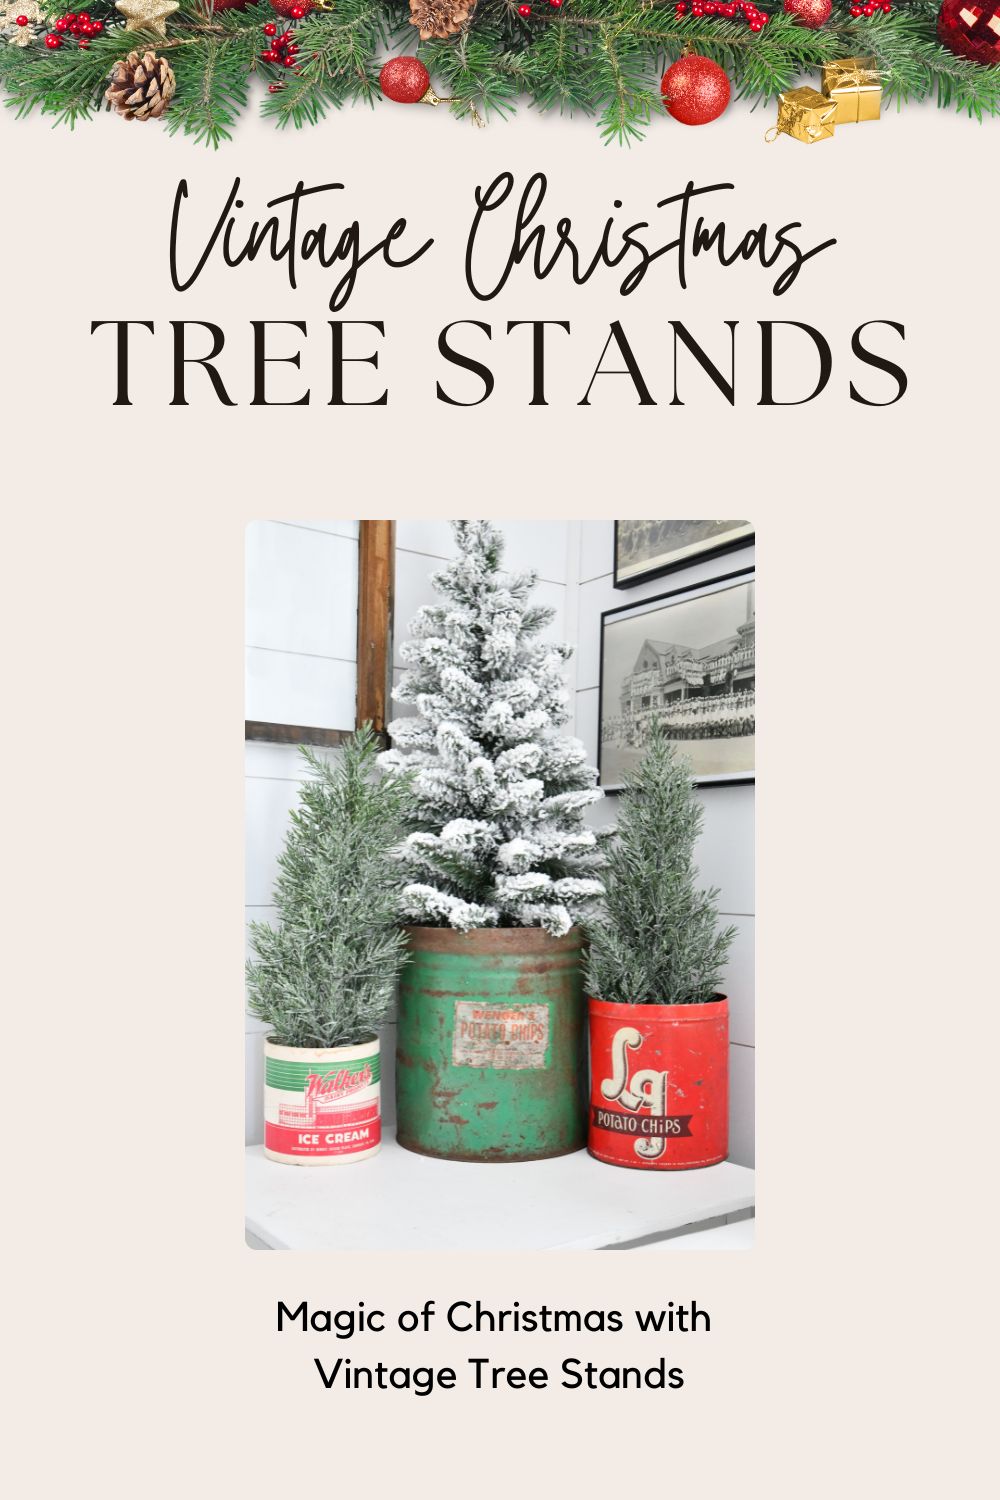 Magic of Christmas with Vintage Tree Stands